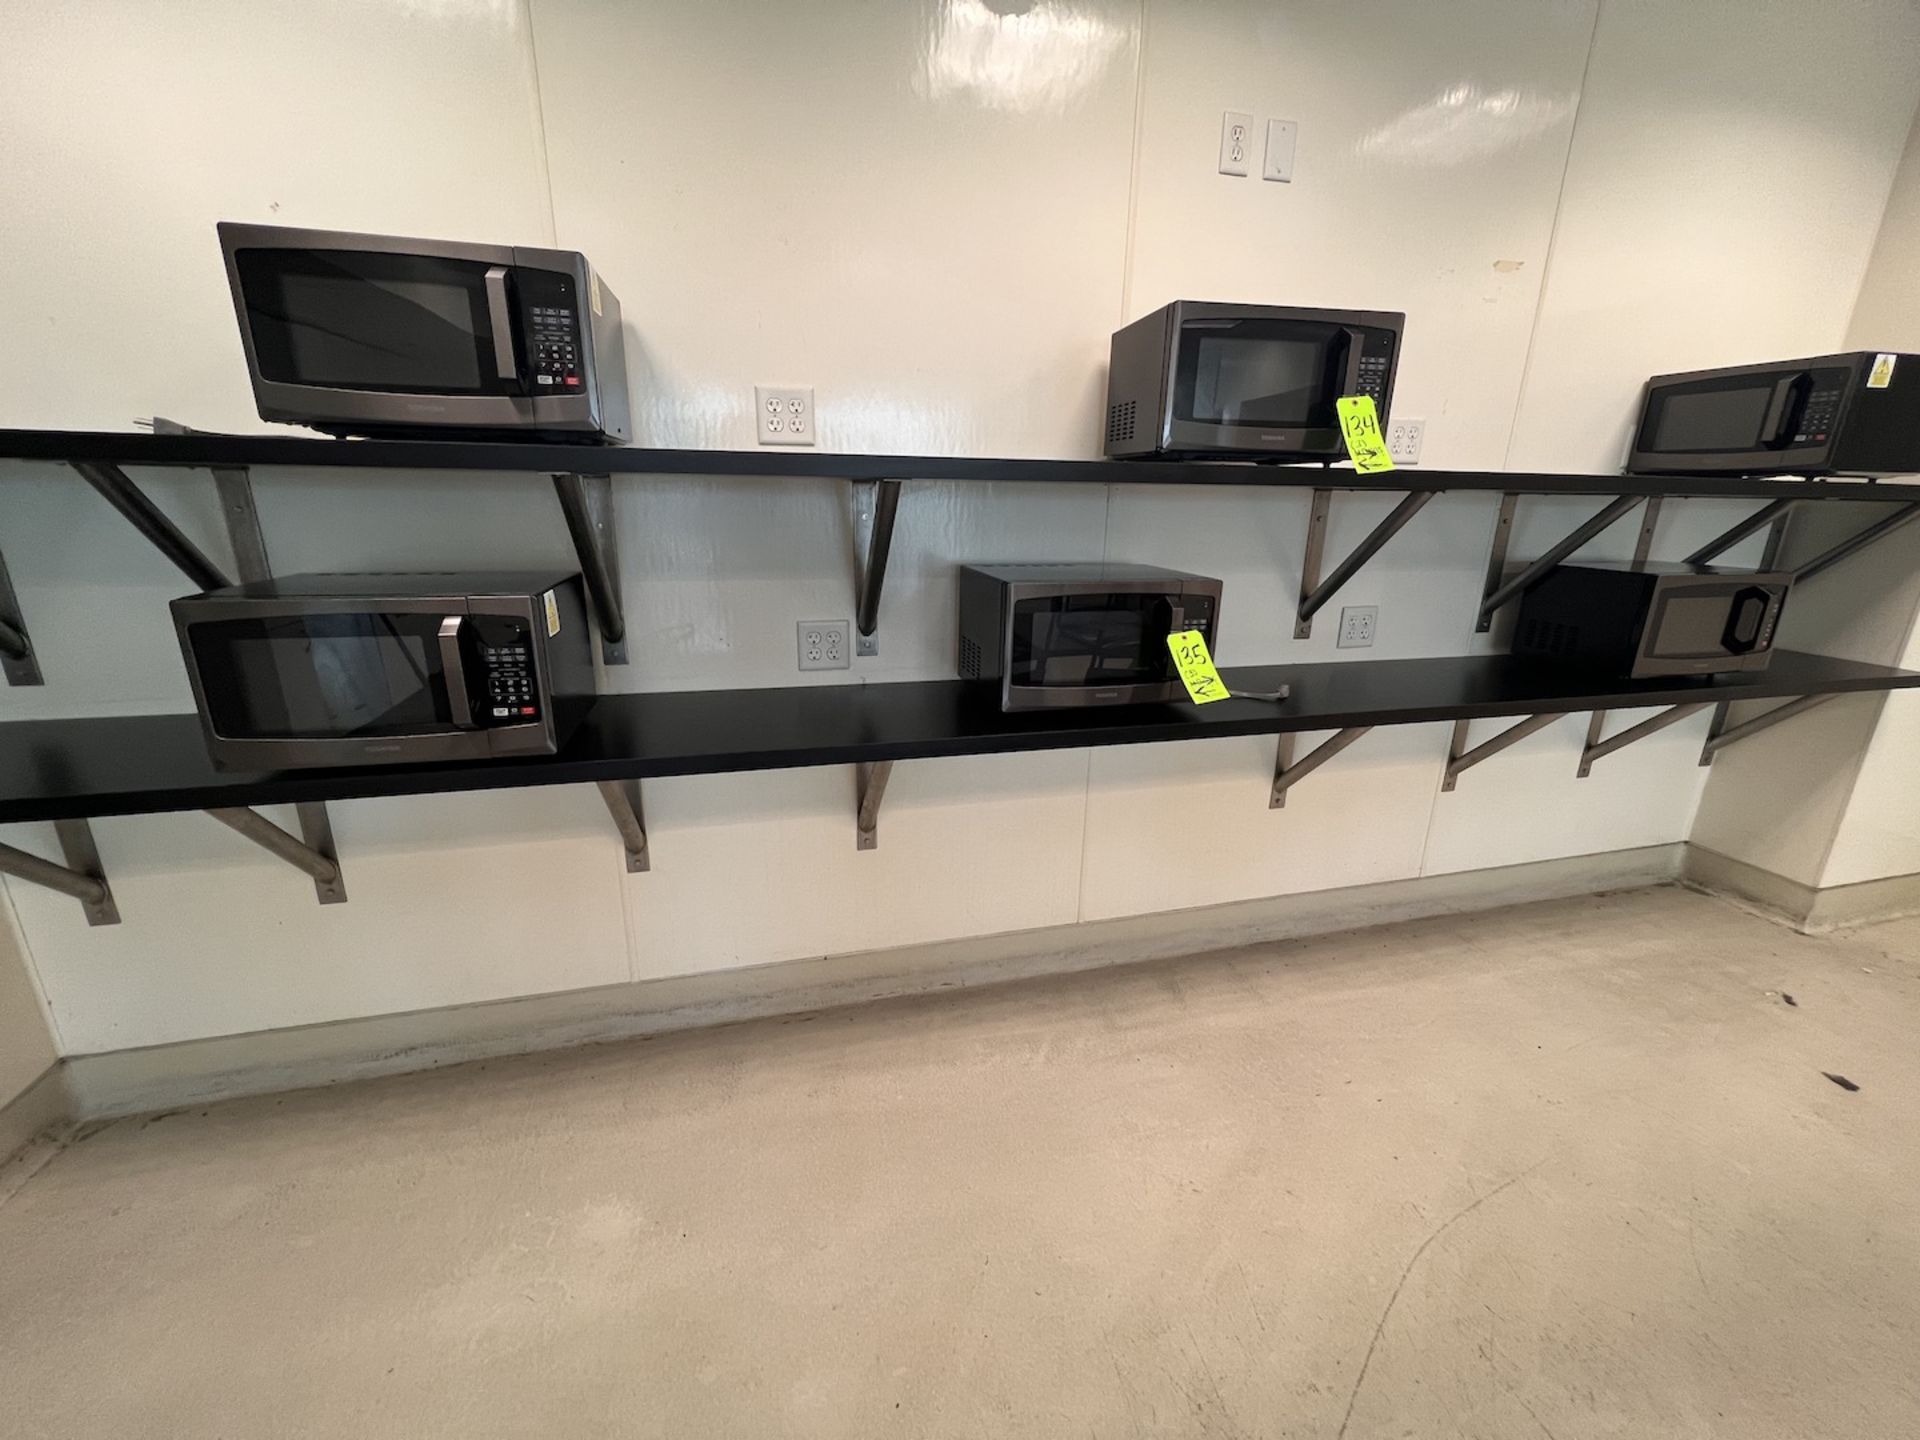 (2) TOSHIBA MICROWAVES (RIGGING & SIMPLE LOADING FEE $20.00) (NOTE: DOES NOT INCLUDE SKIDDING OR